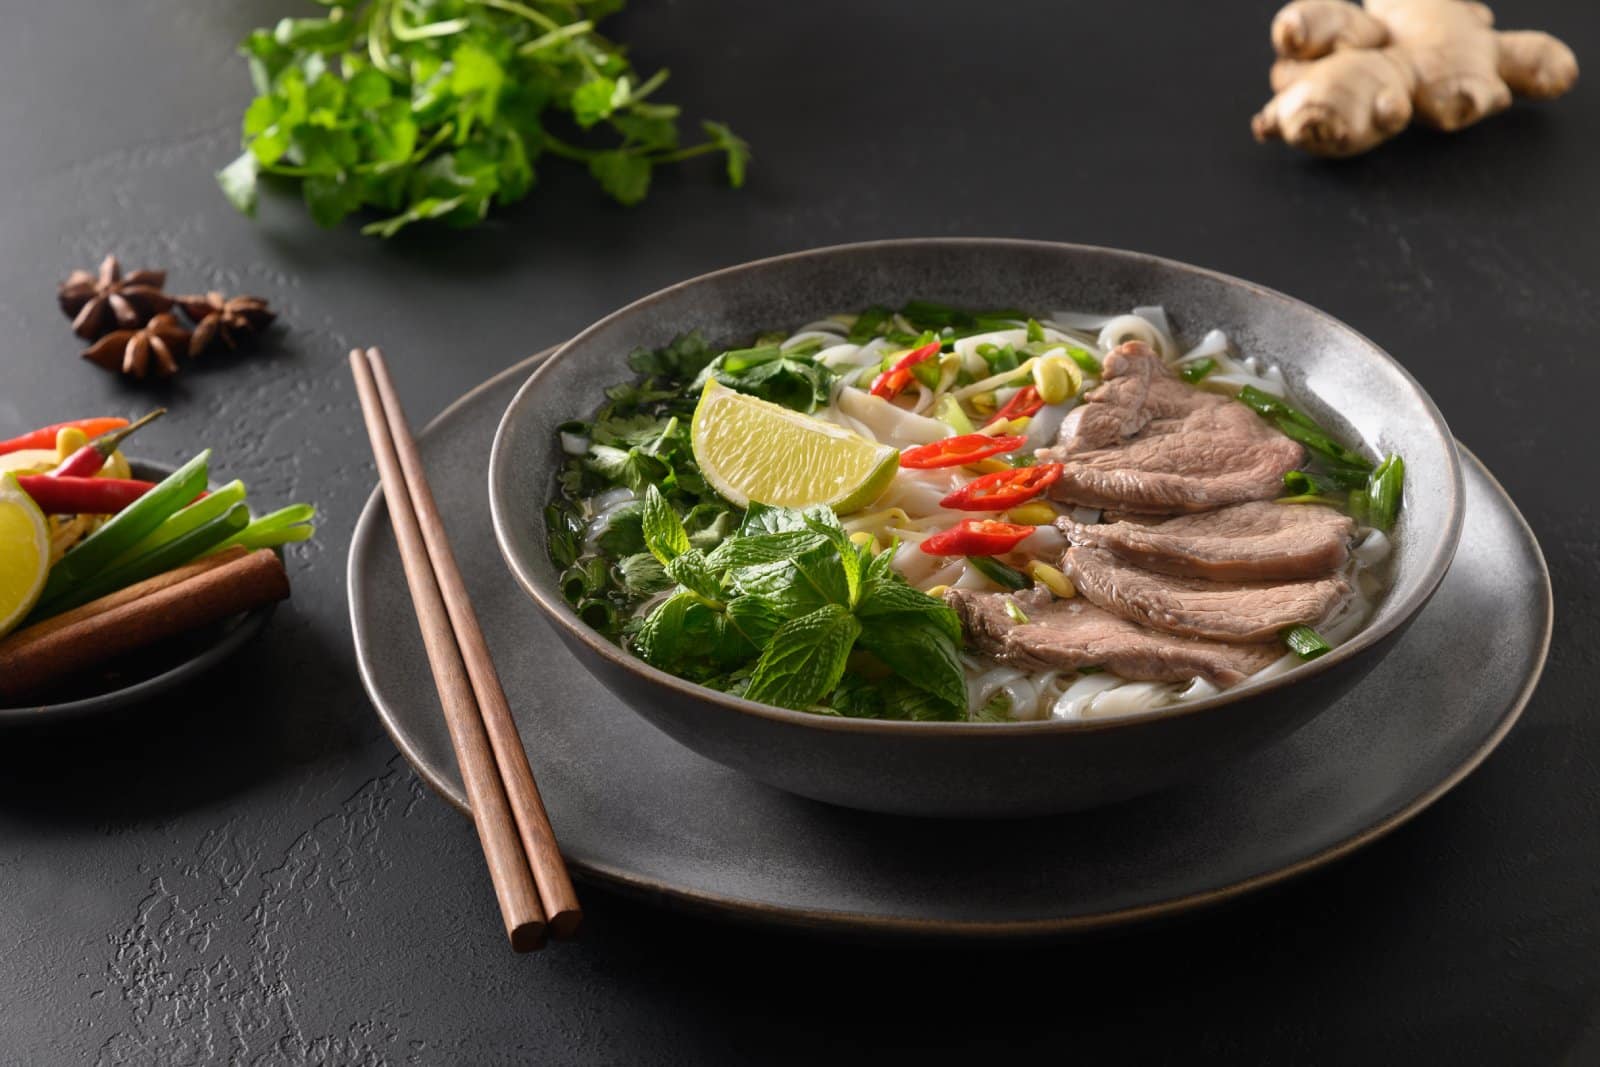 Image Credit: Shutterstock / Lazhko Svetlana <p>A fragrant Vietnamese soup with rice noodles, herbs, and meat, often chicken or beef, in a clear broth. Each bowl is a soothing balance of flavors and textures.</p>